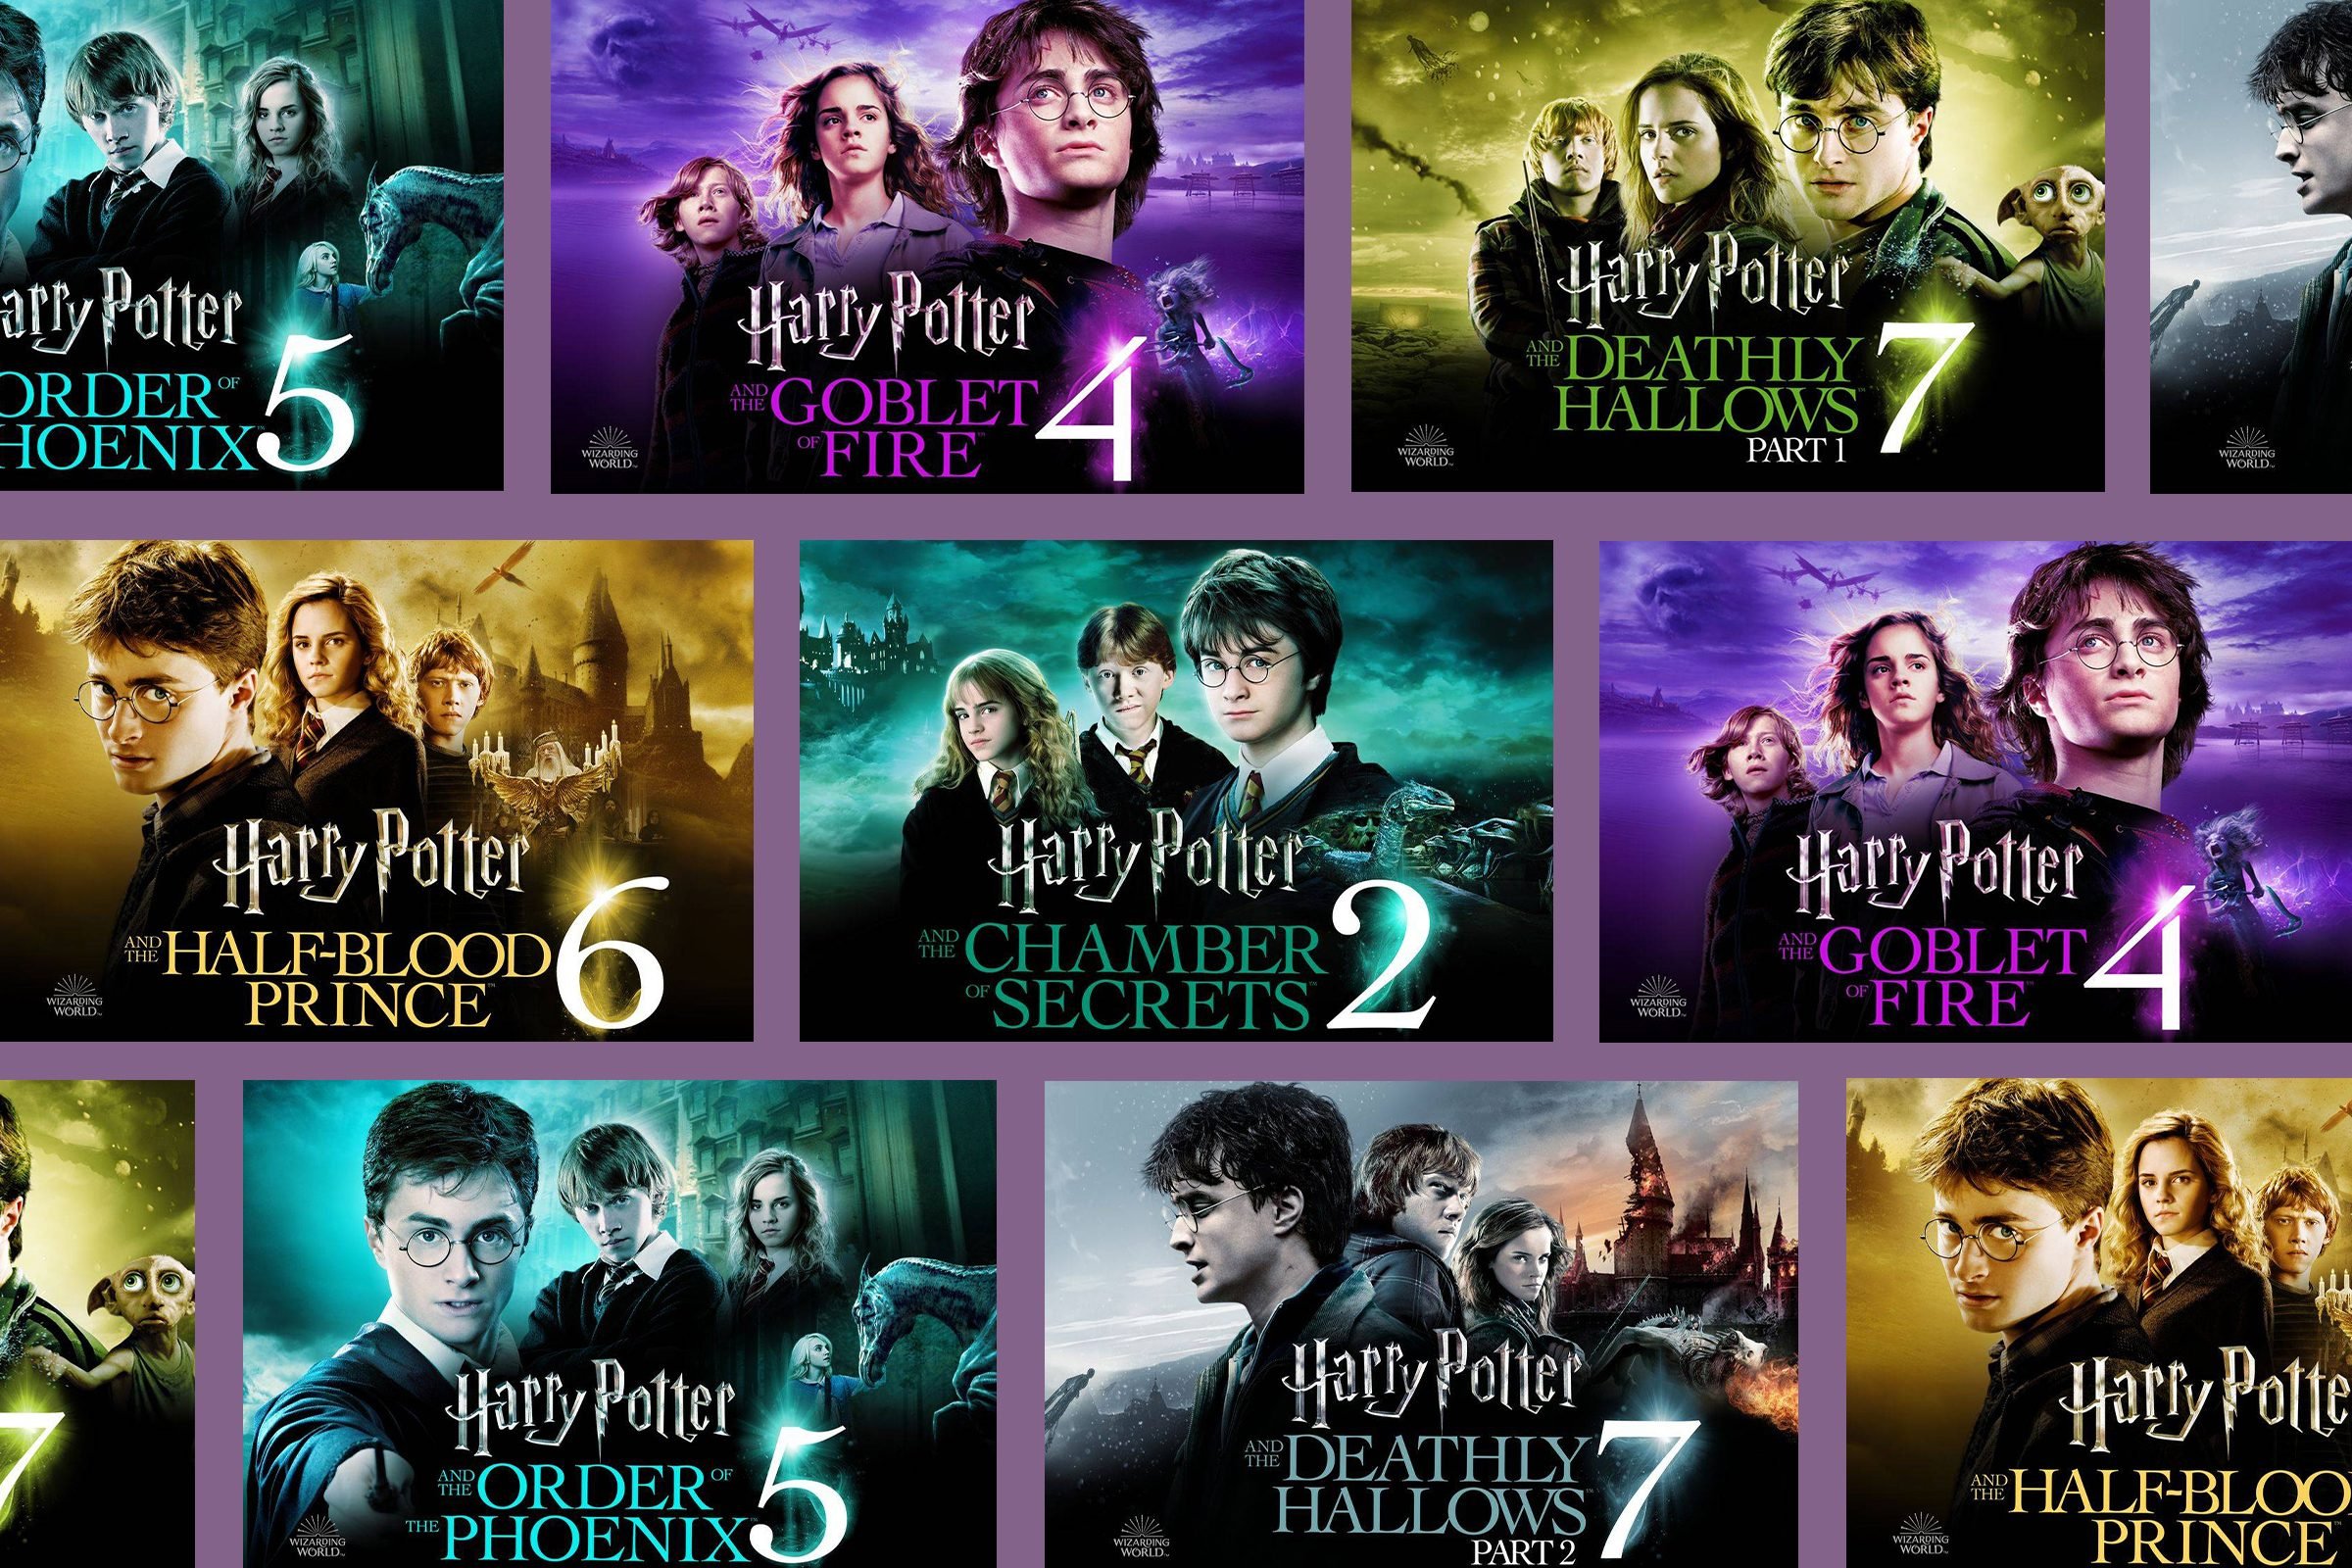 Are the Harry Potter movies available in different formats, such as DVD and Blu-ray?